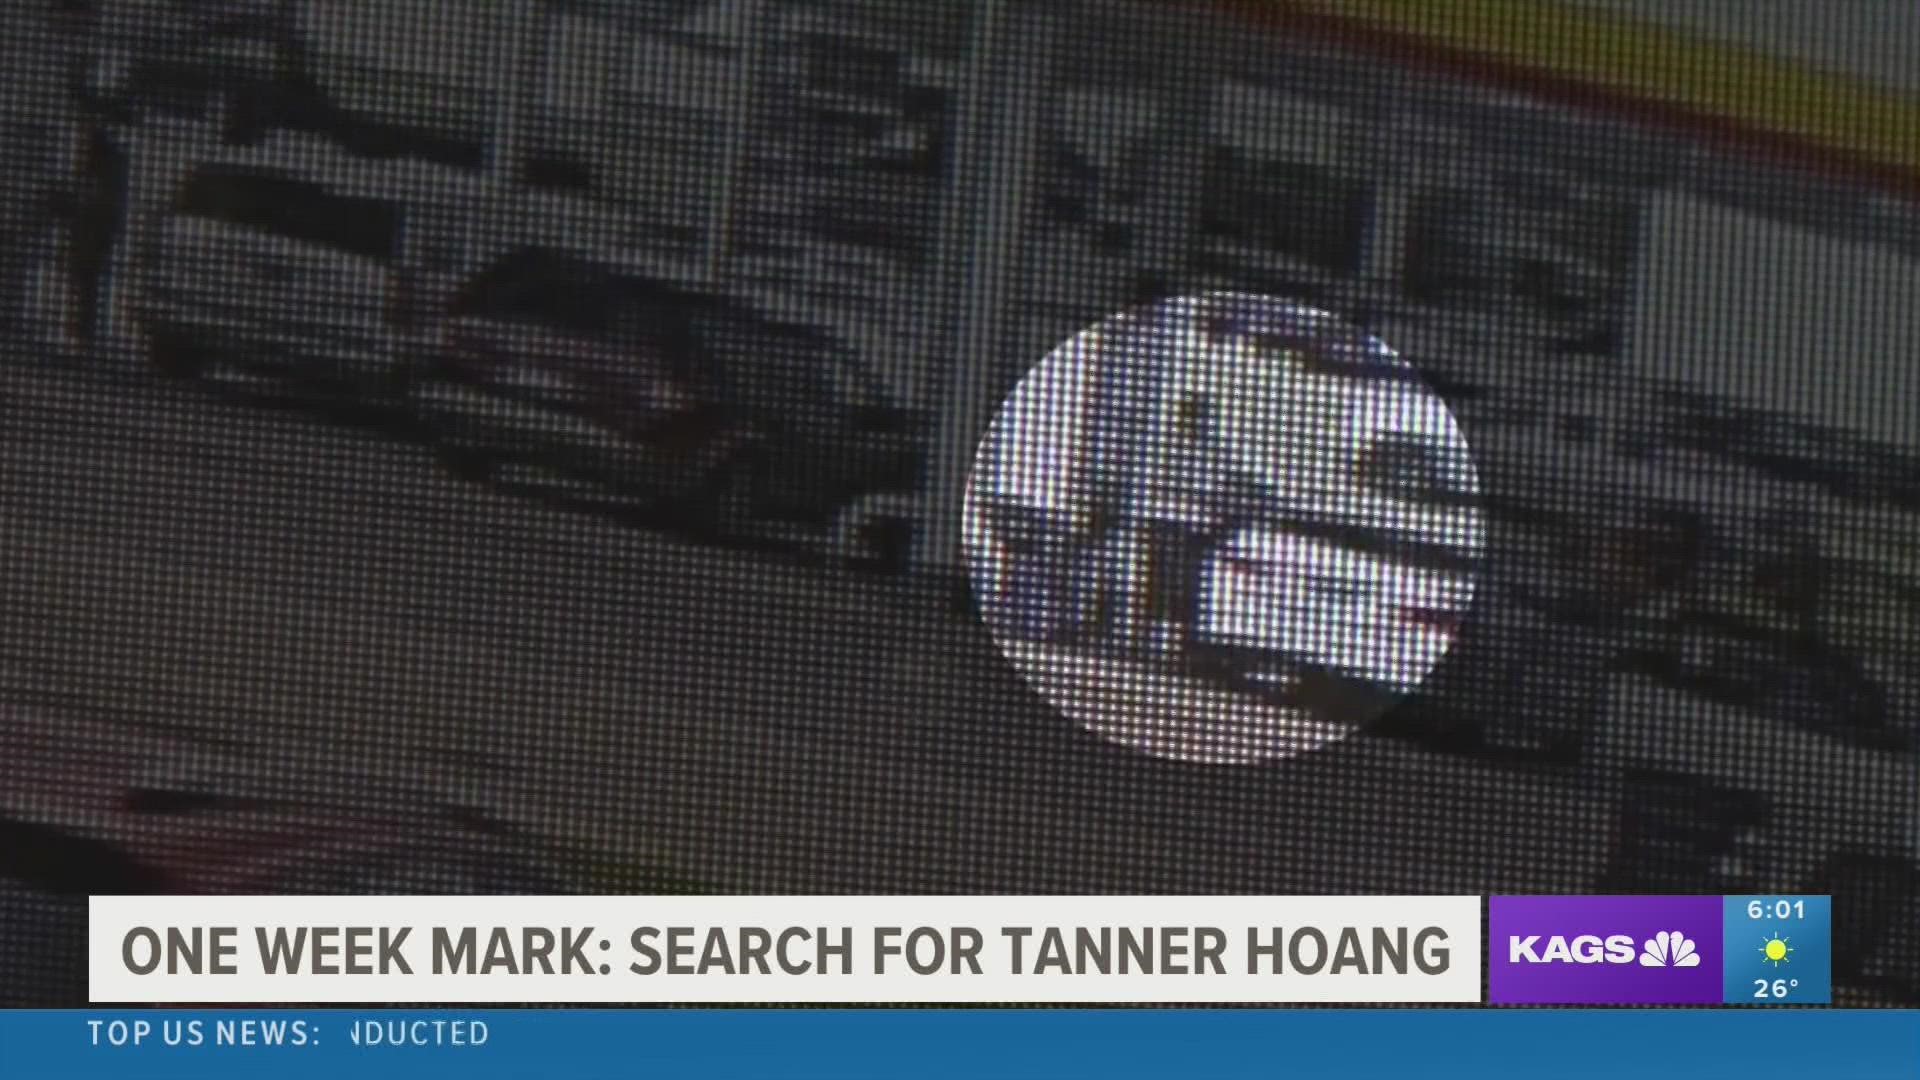 One week has officially passed since Tanner Hoang went missing, and since then clues about his whereabouts have surfaced, but he has not yet been located.